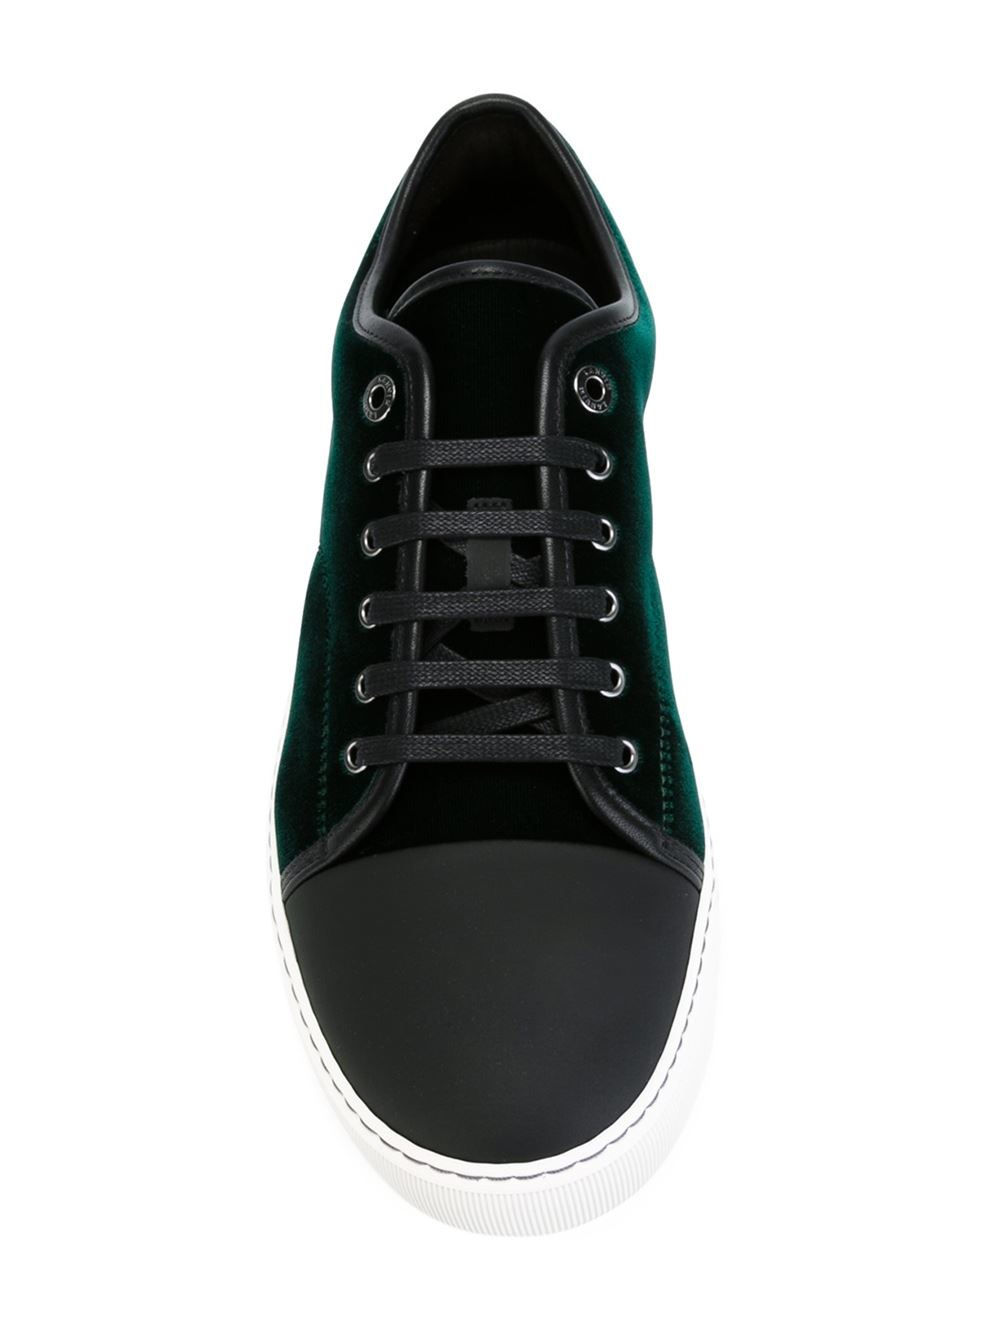 lanvin sneakers green,Quality assurance,protein-burger.com